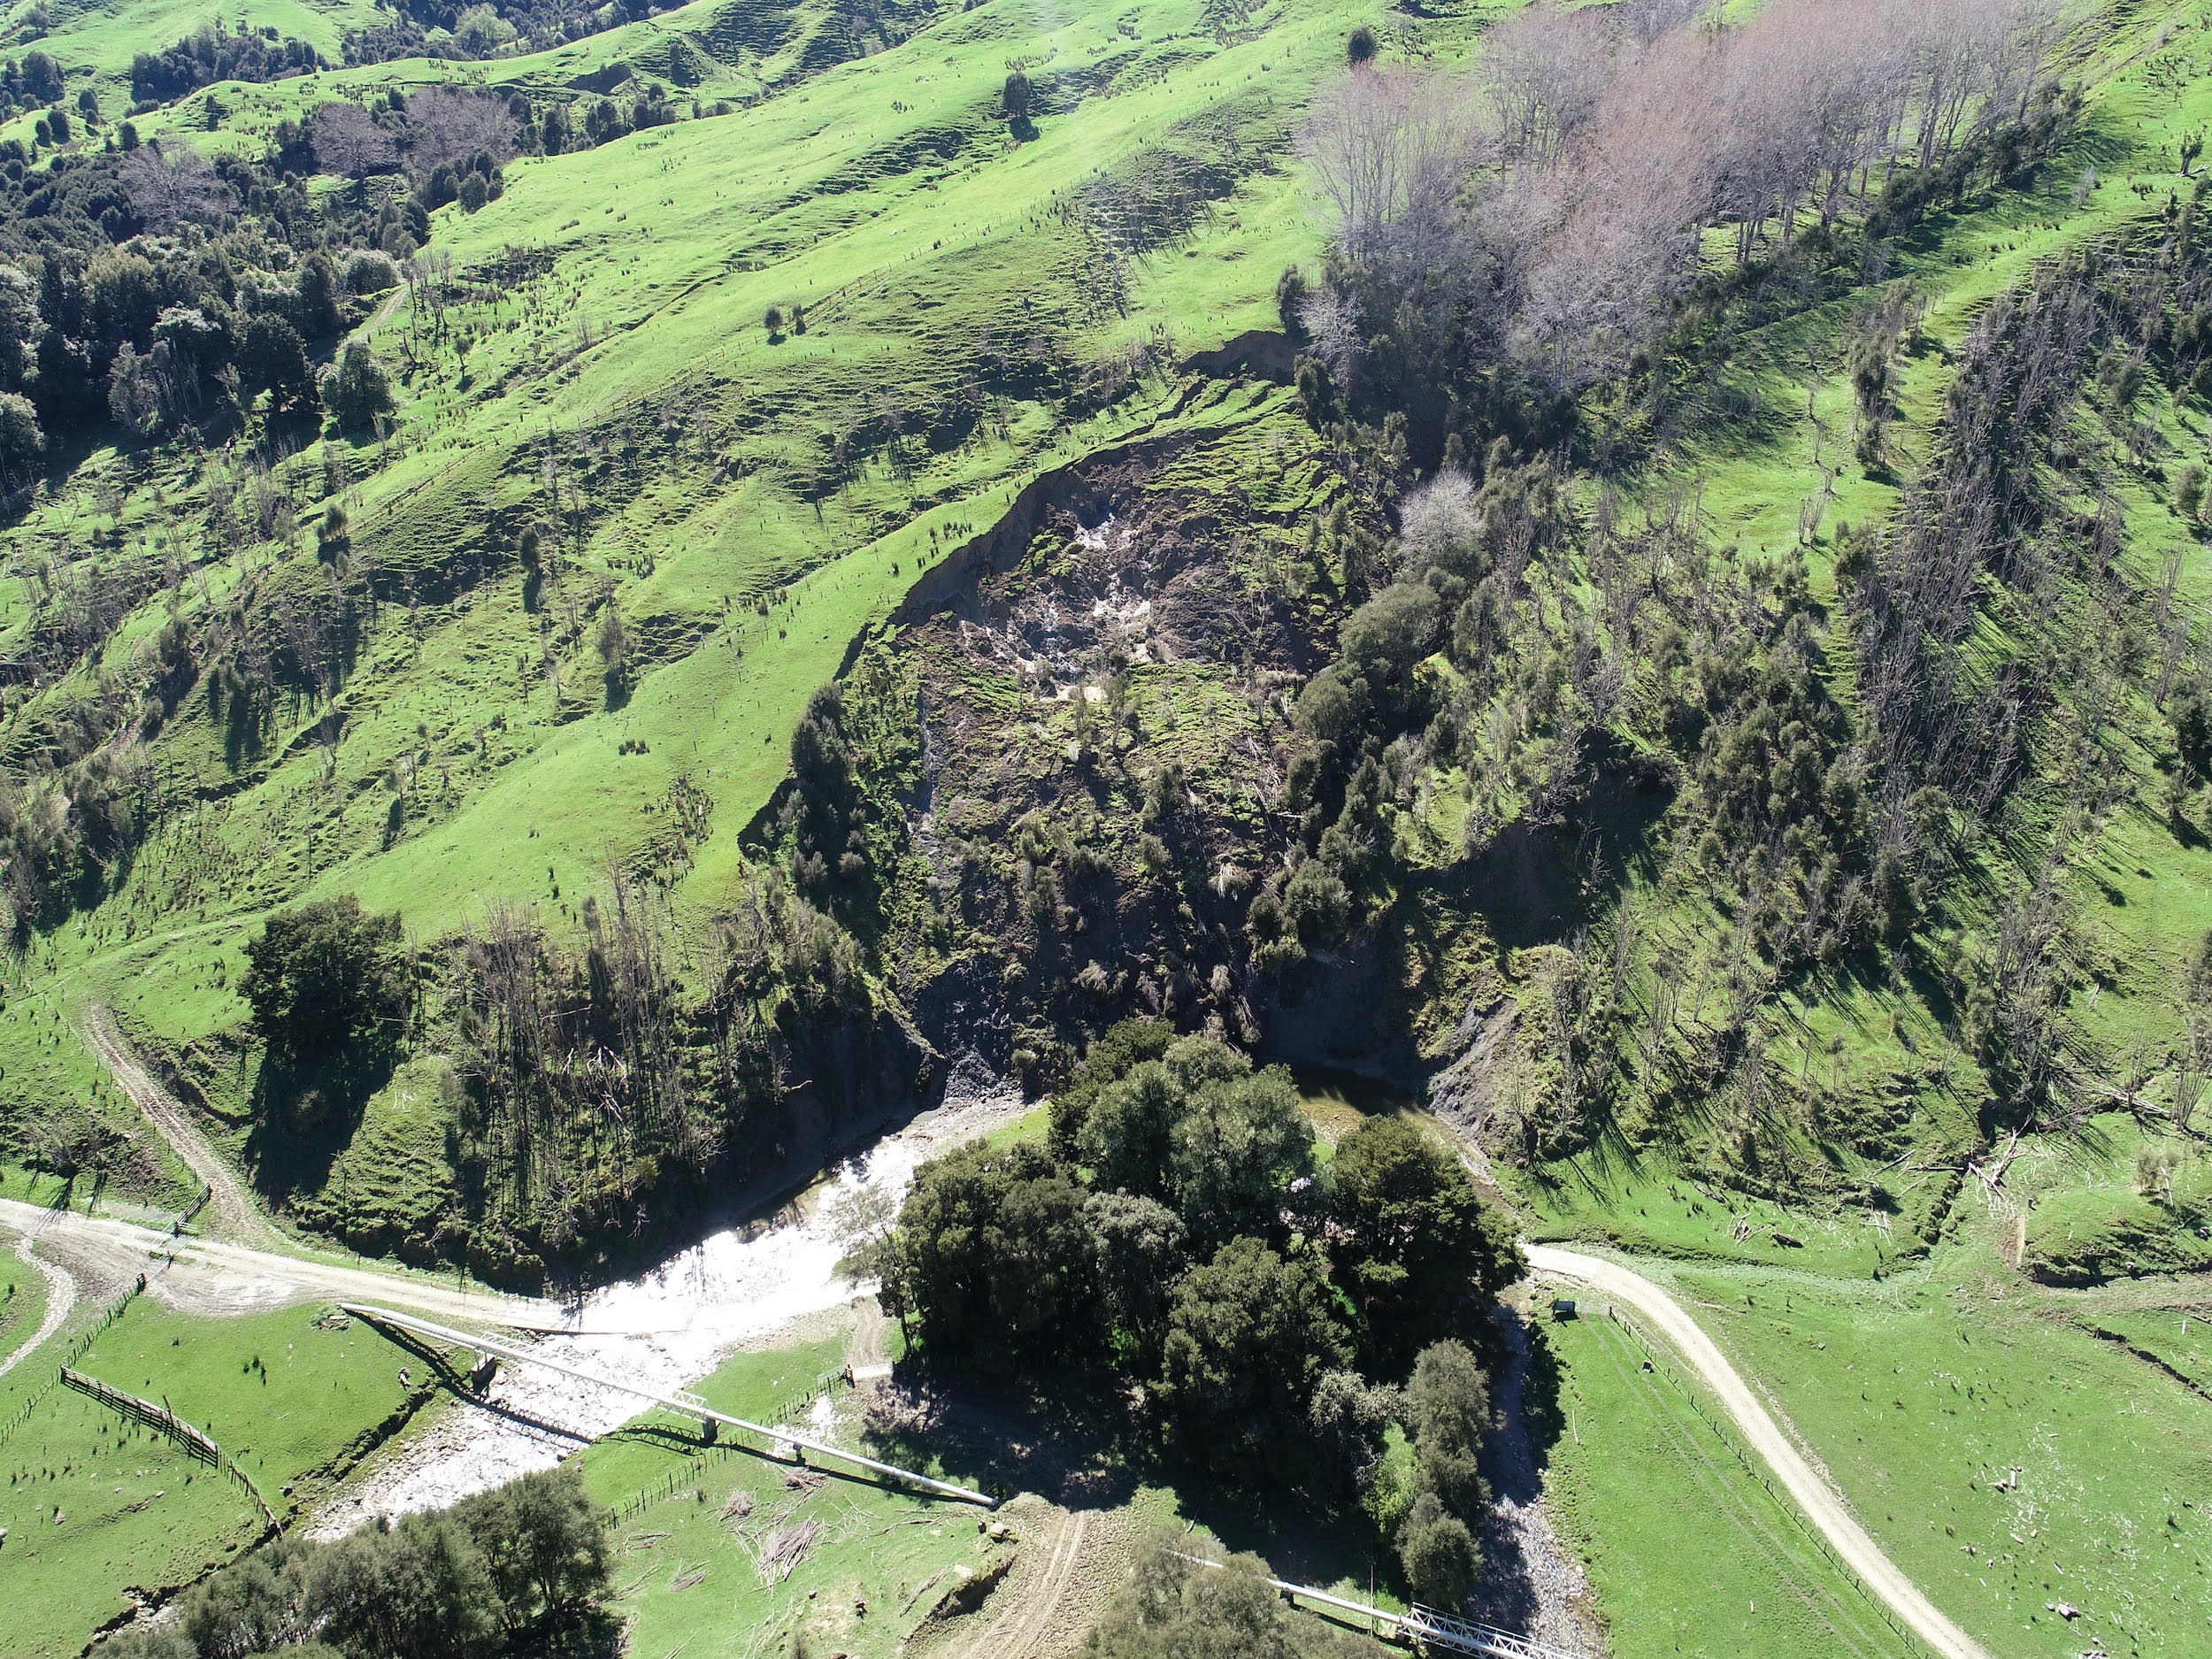 A new landslide near to Gisborne in New Zealand.  Image courtesy of Dr Murry Cave.